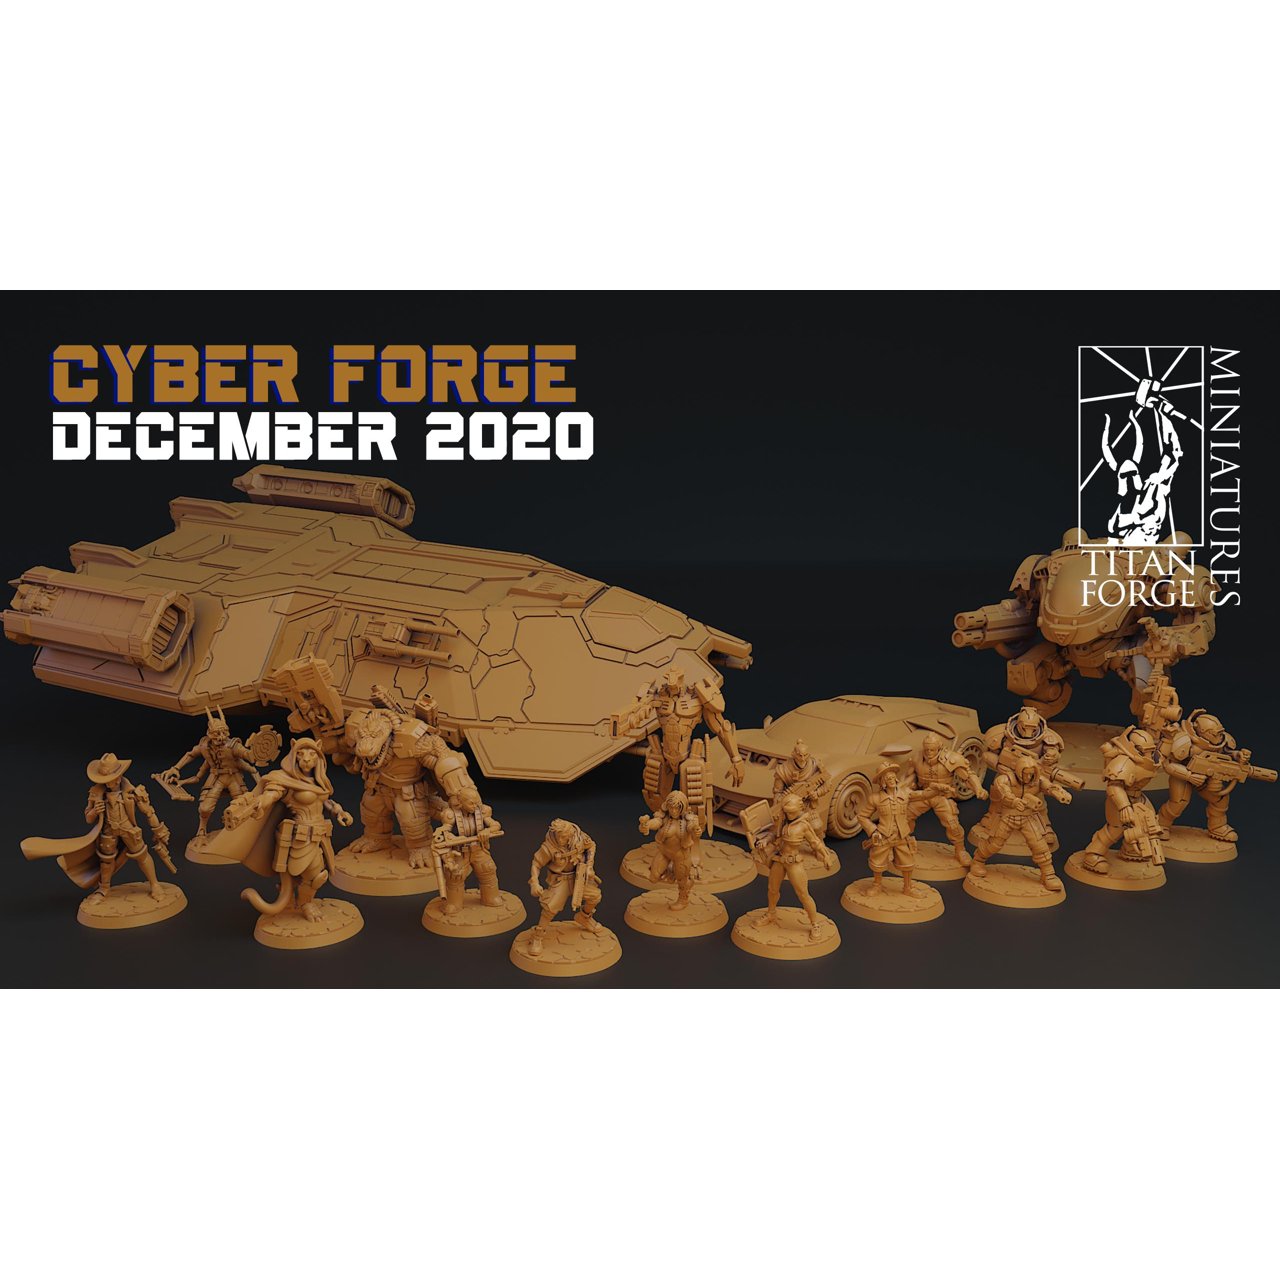 Cyber-Forge Miniatures December 2020 Cyber Forge  MINISTL